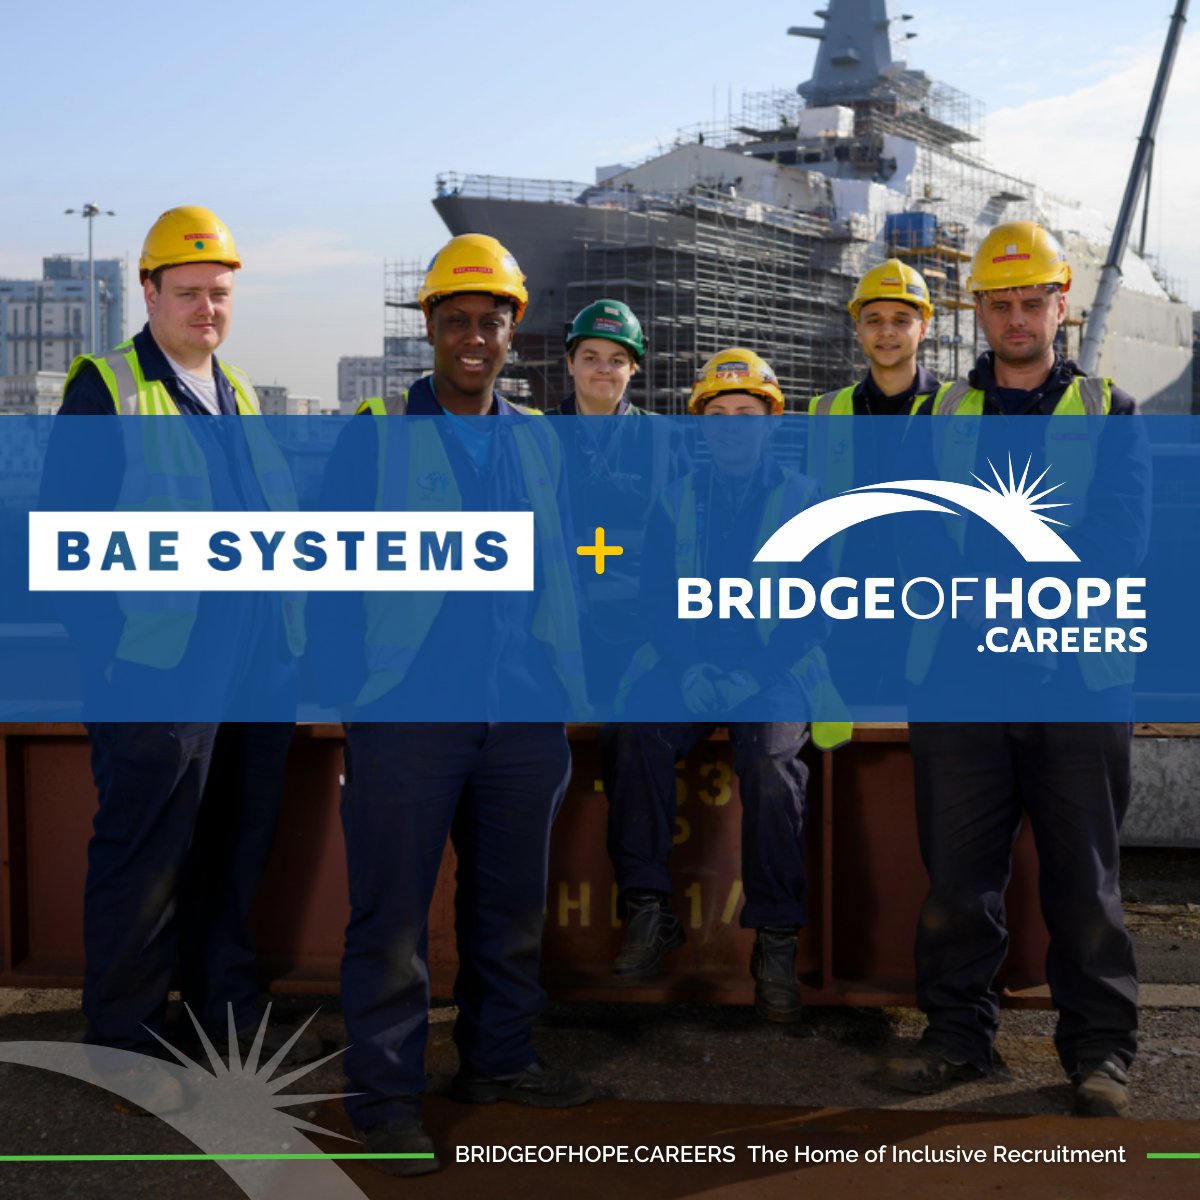 🎉 We're proud to be partnering with @BAESystemsInc to drive forward inclusive hiring practices. 🤝

To see the live job openings, visit
➡️bridgeofhope.careers/employers-list…

#DiversityInTech #InclusiveHiring